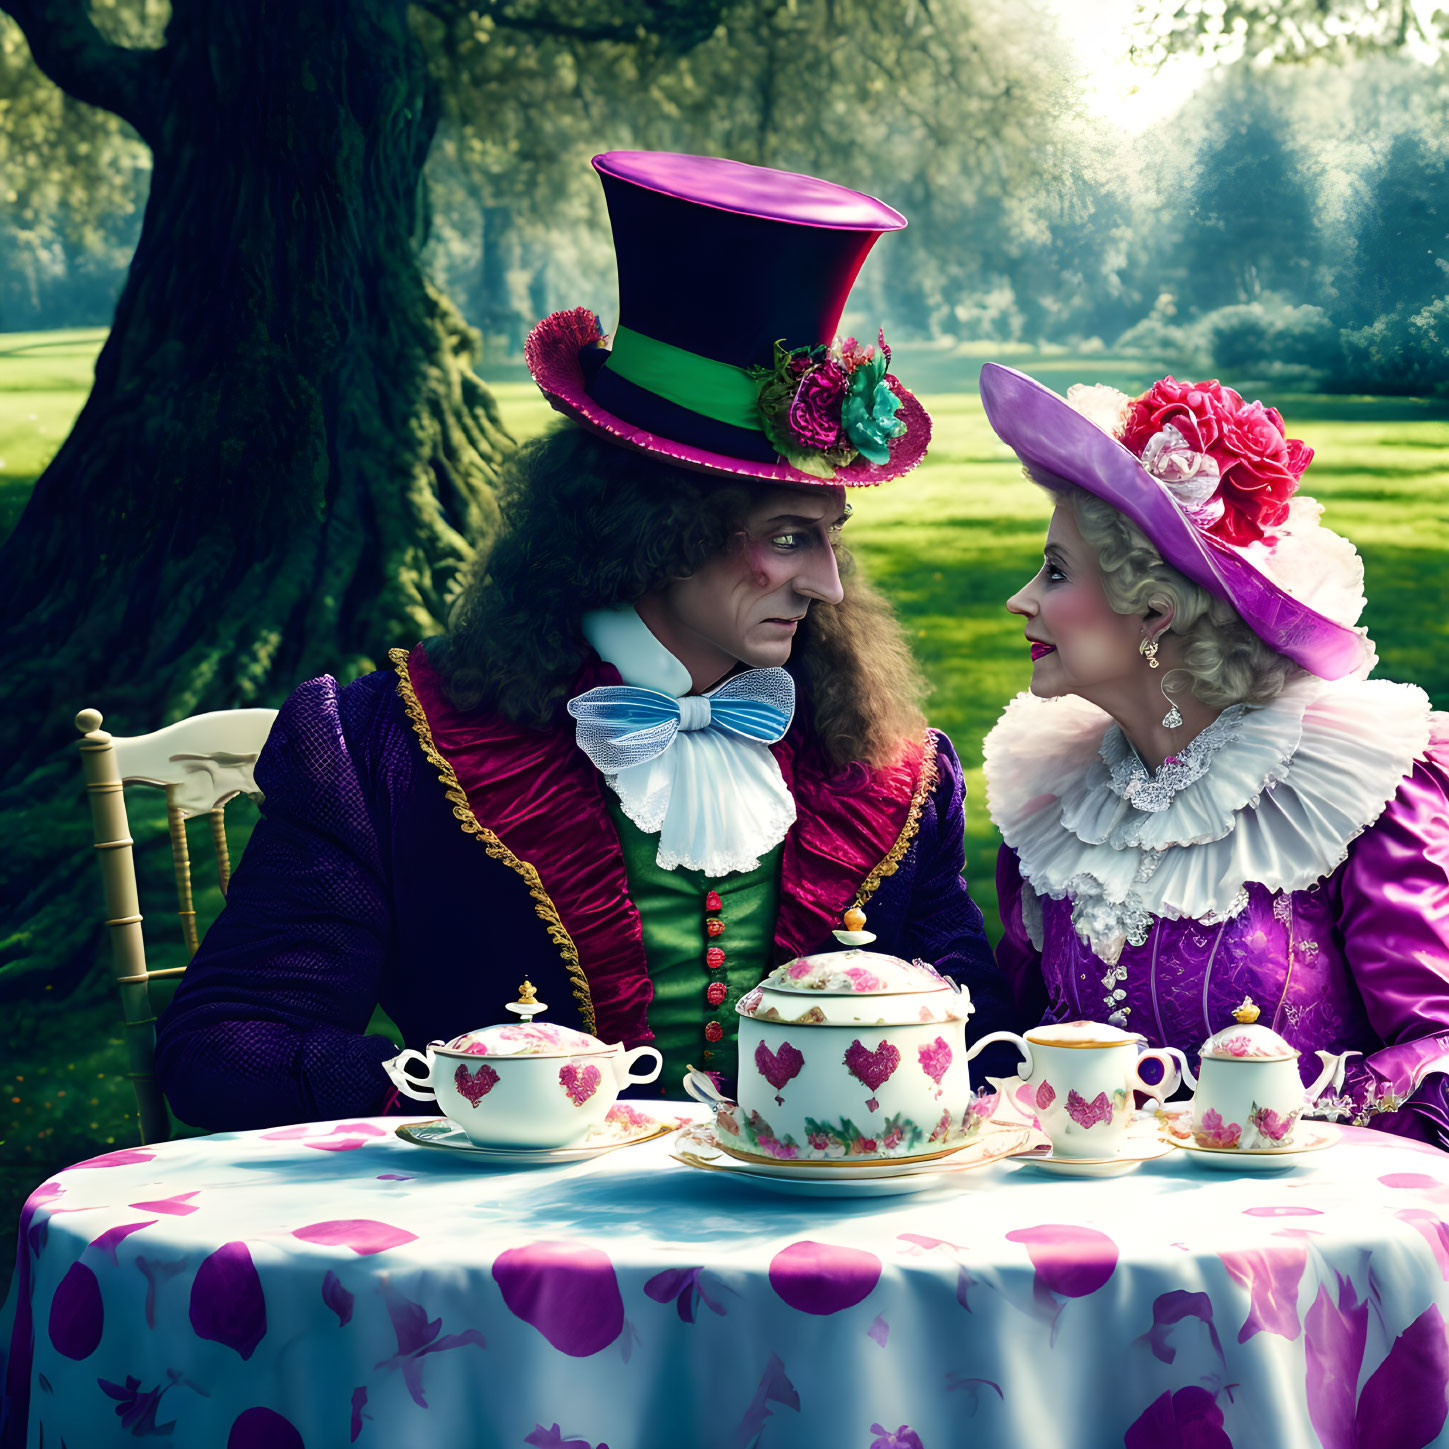 Whimsical outdoor tea party with Mad Hatter and woman in purple costume